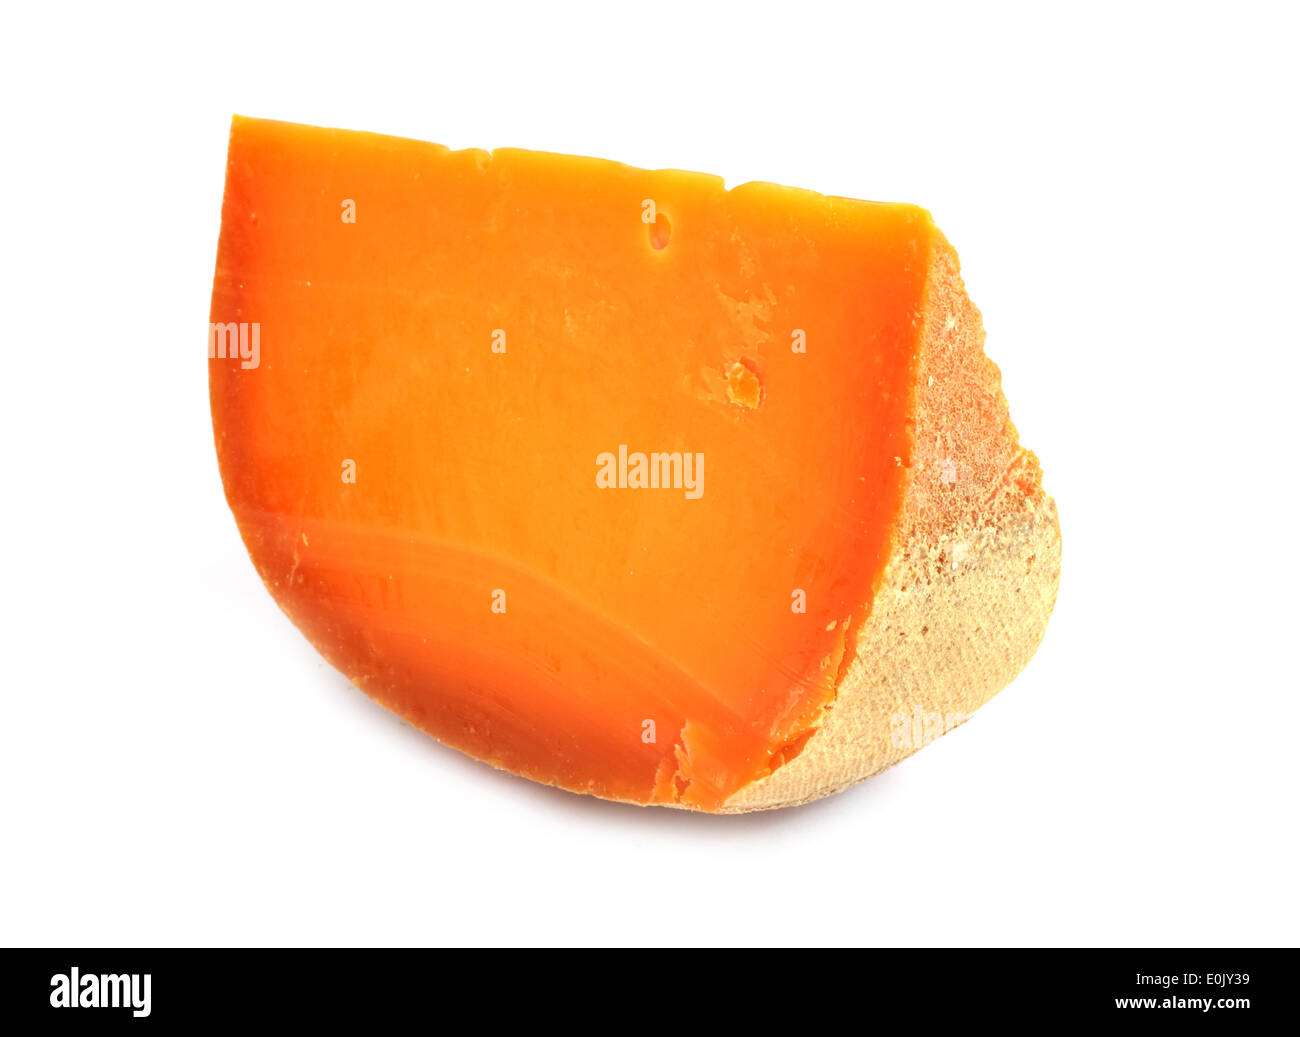 Portion of Mimolette Cheese isolated on white background Stock Photo